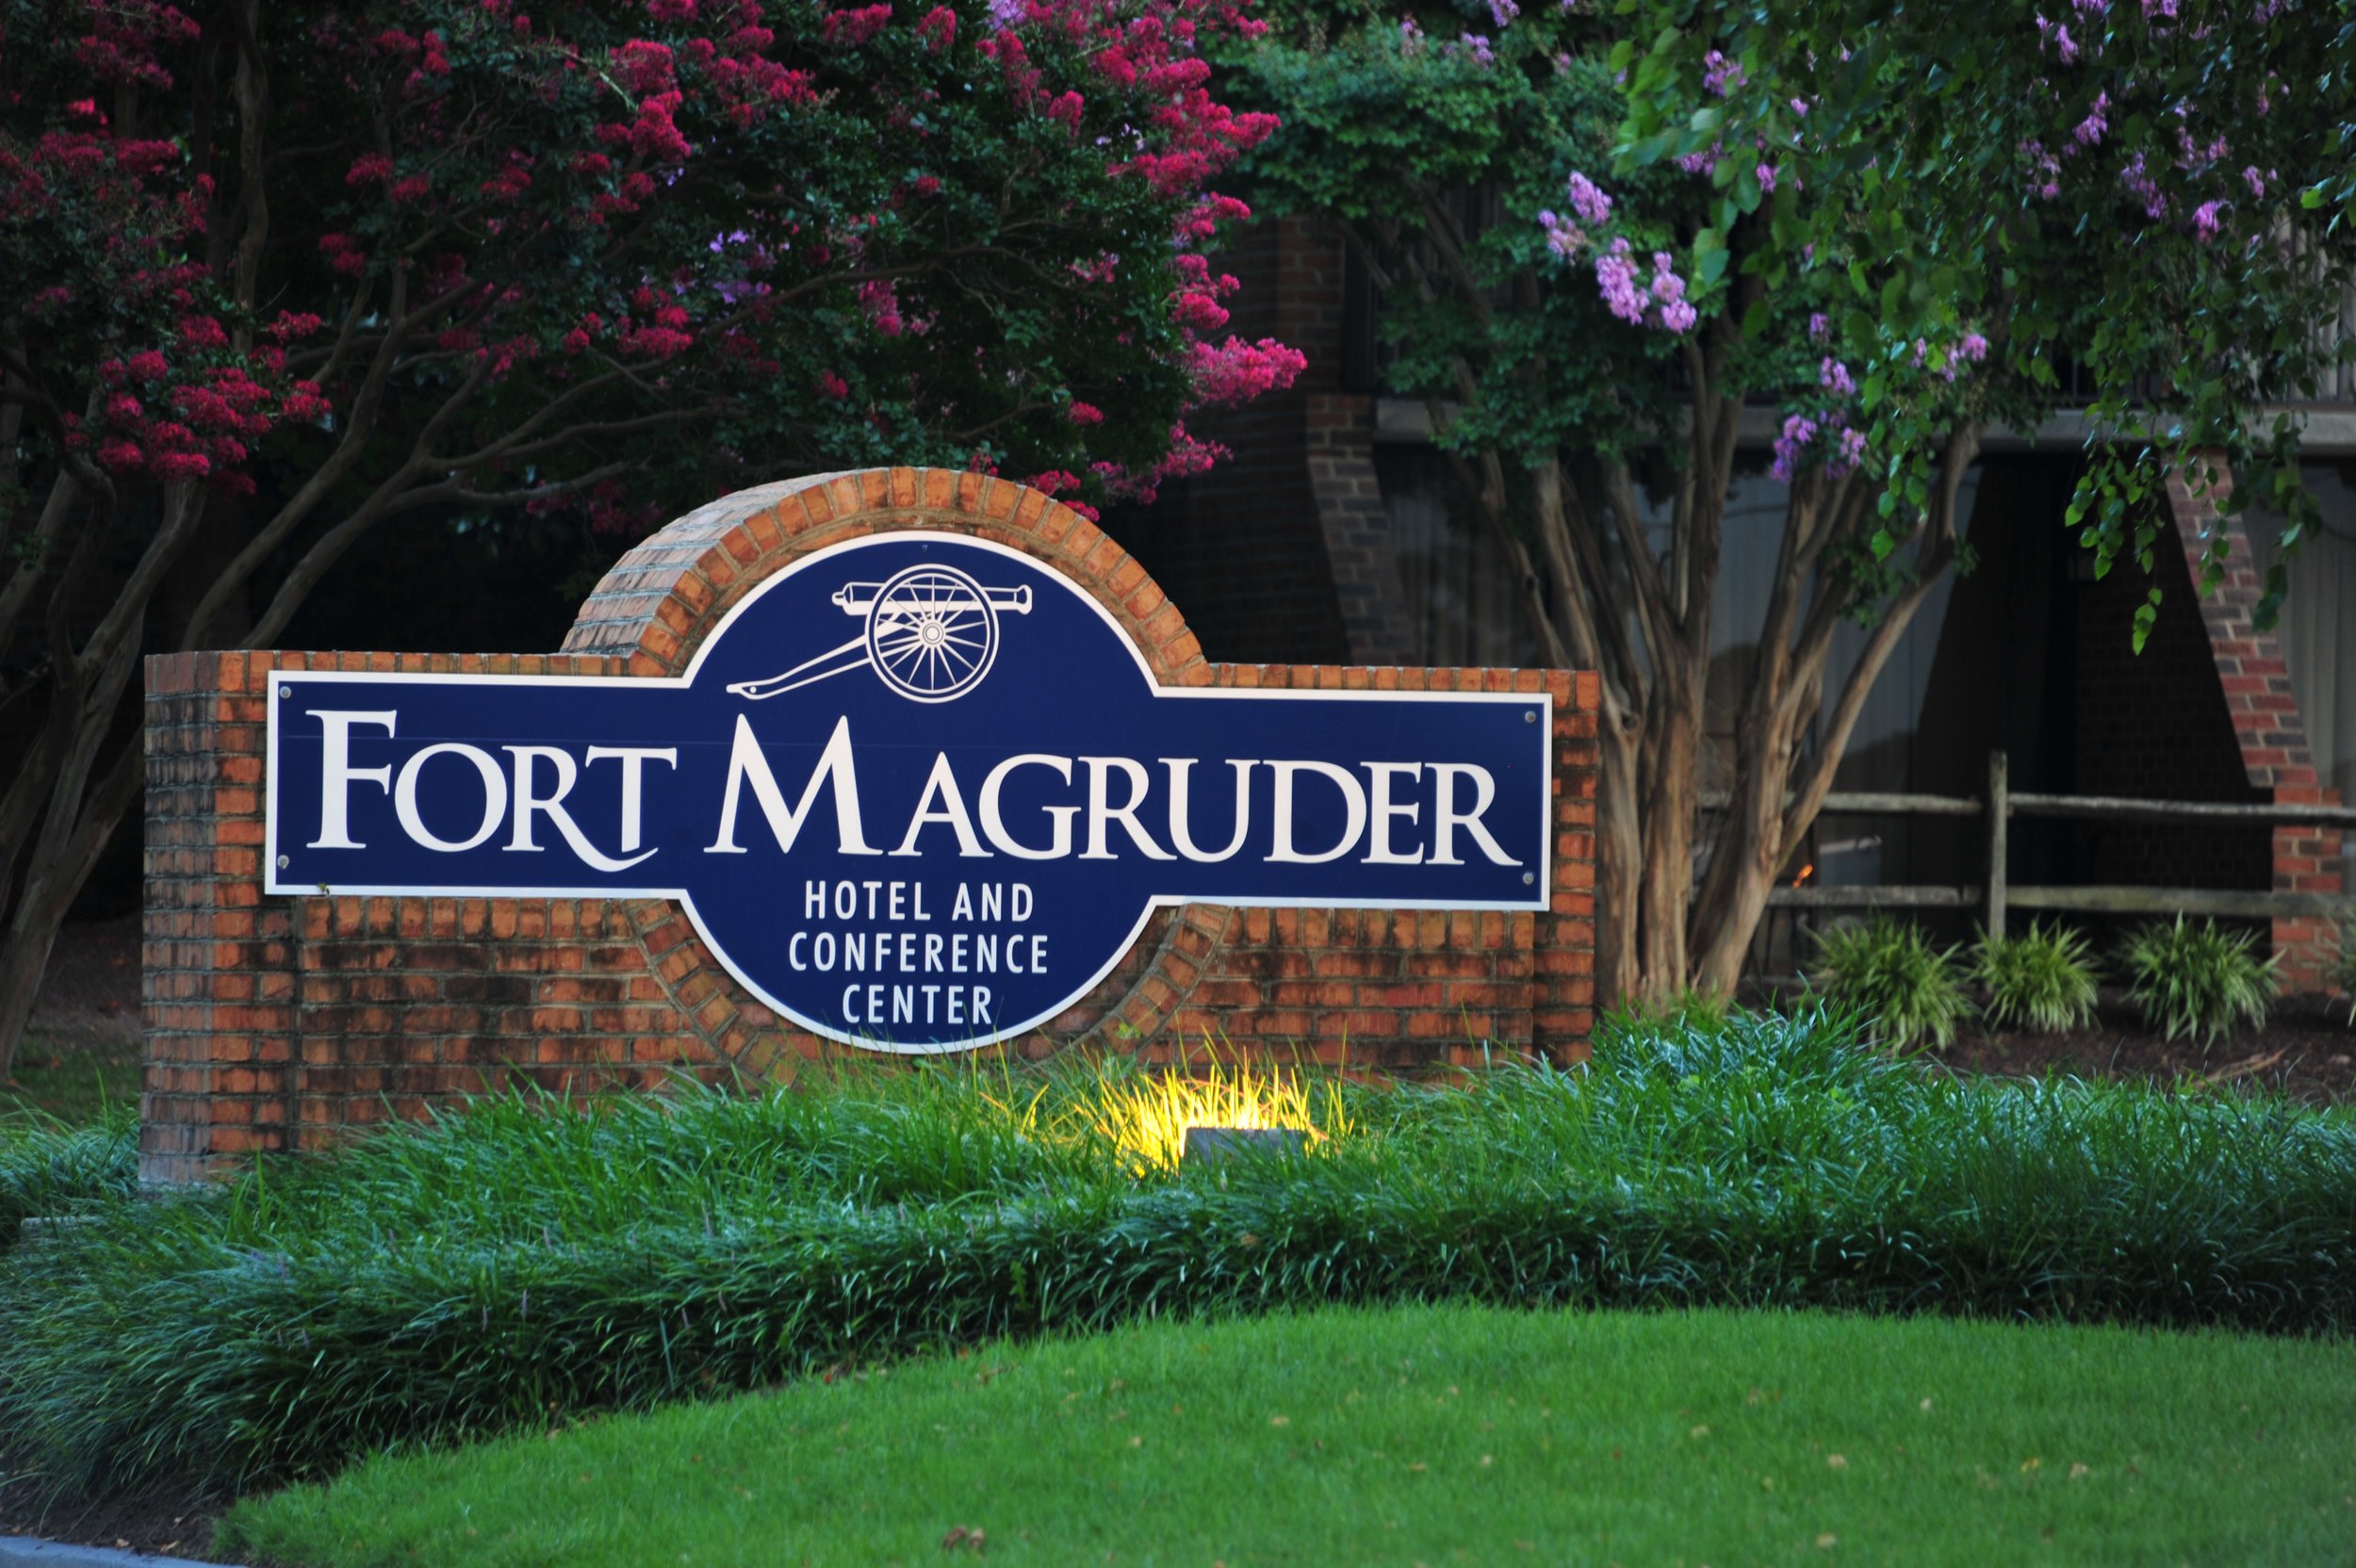 Fort Magruder Hotel And Conference